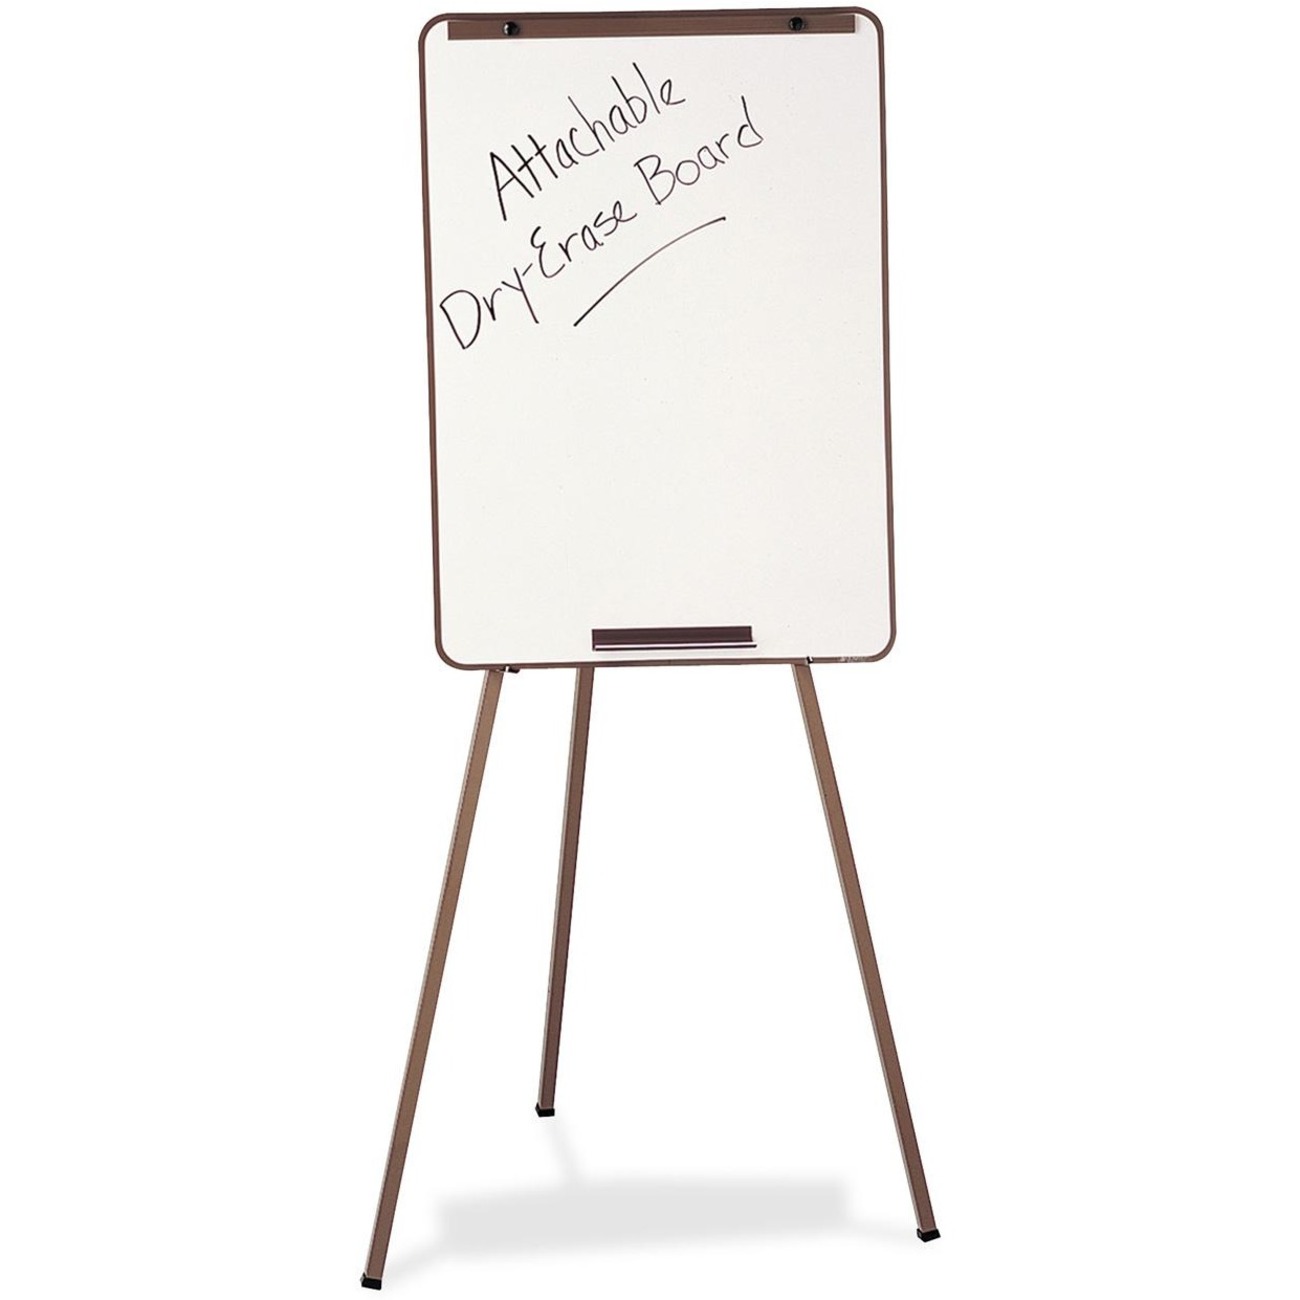 Ocean Stationery And Office Supplies Office Supplies Boards And Easels Boards Easel